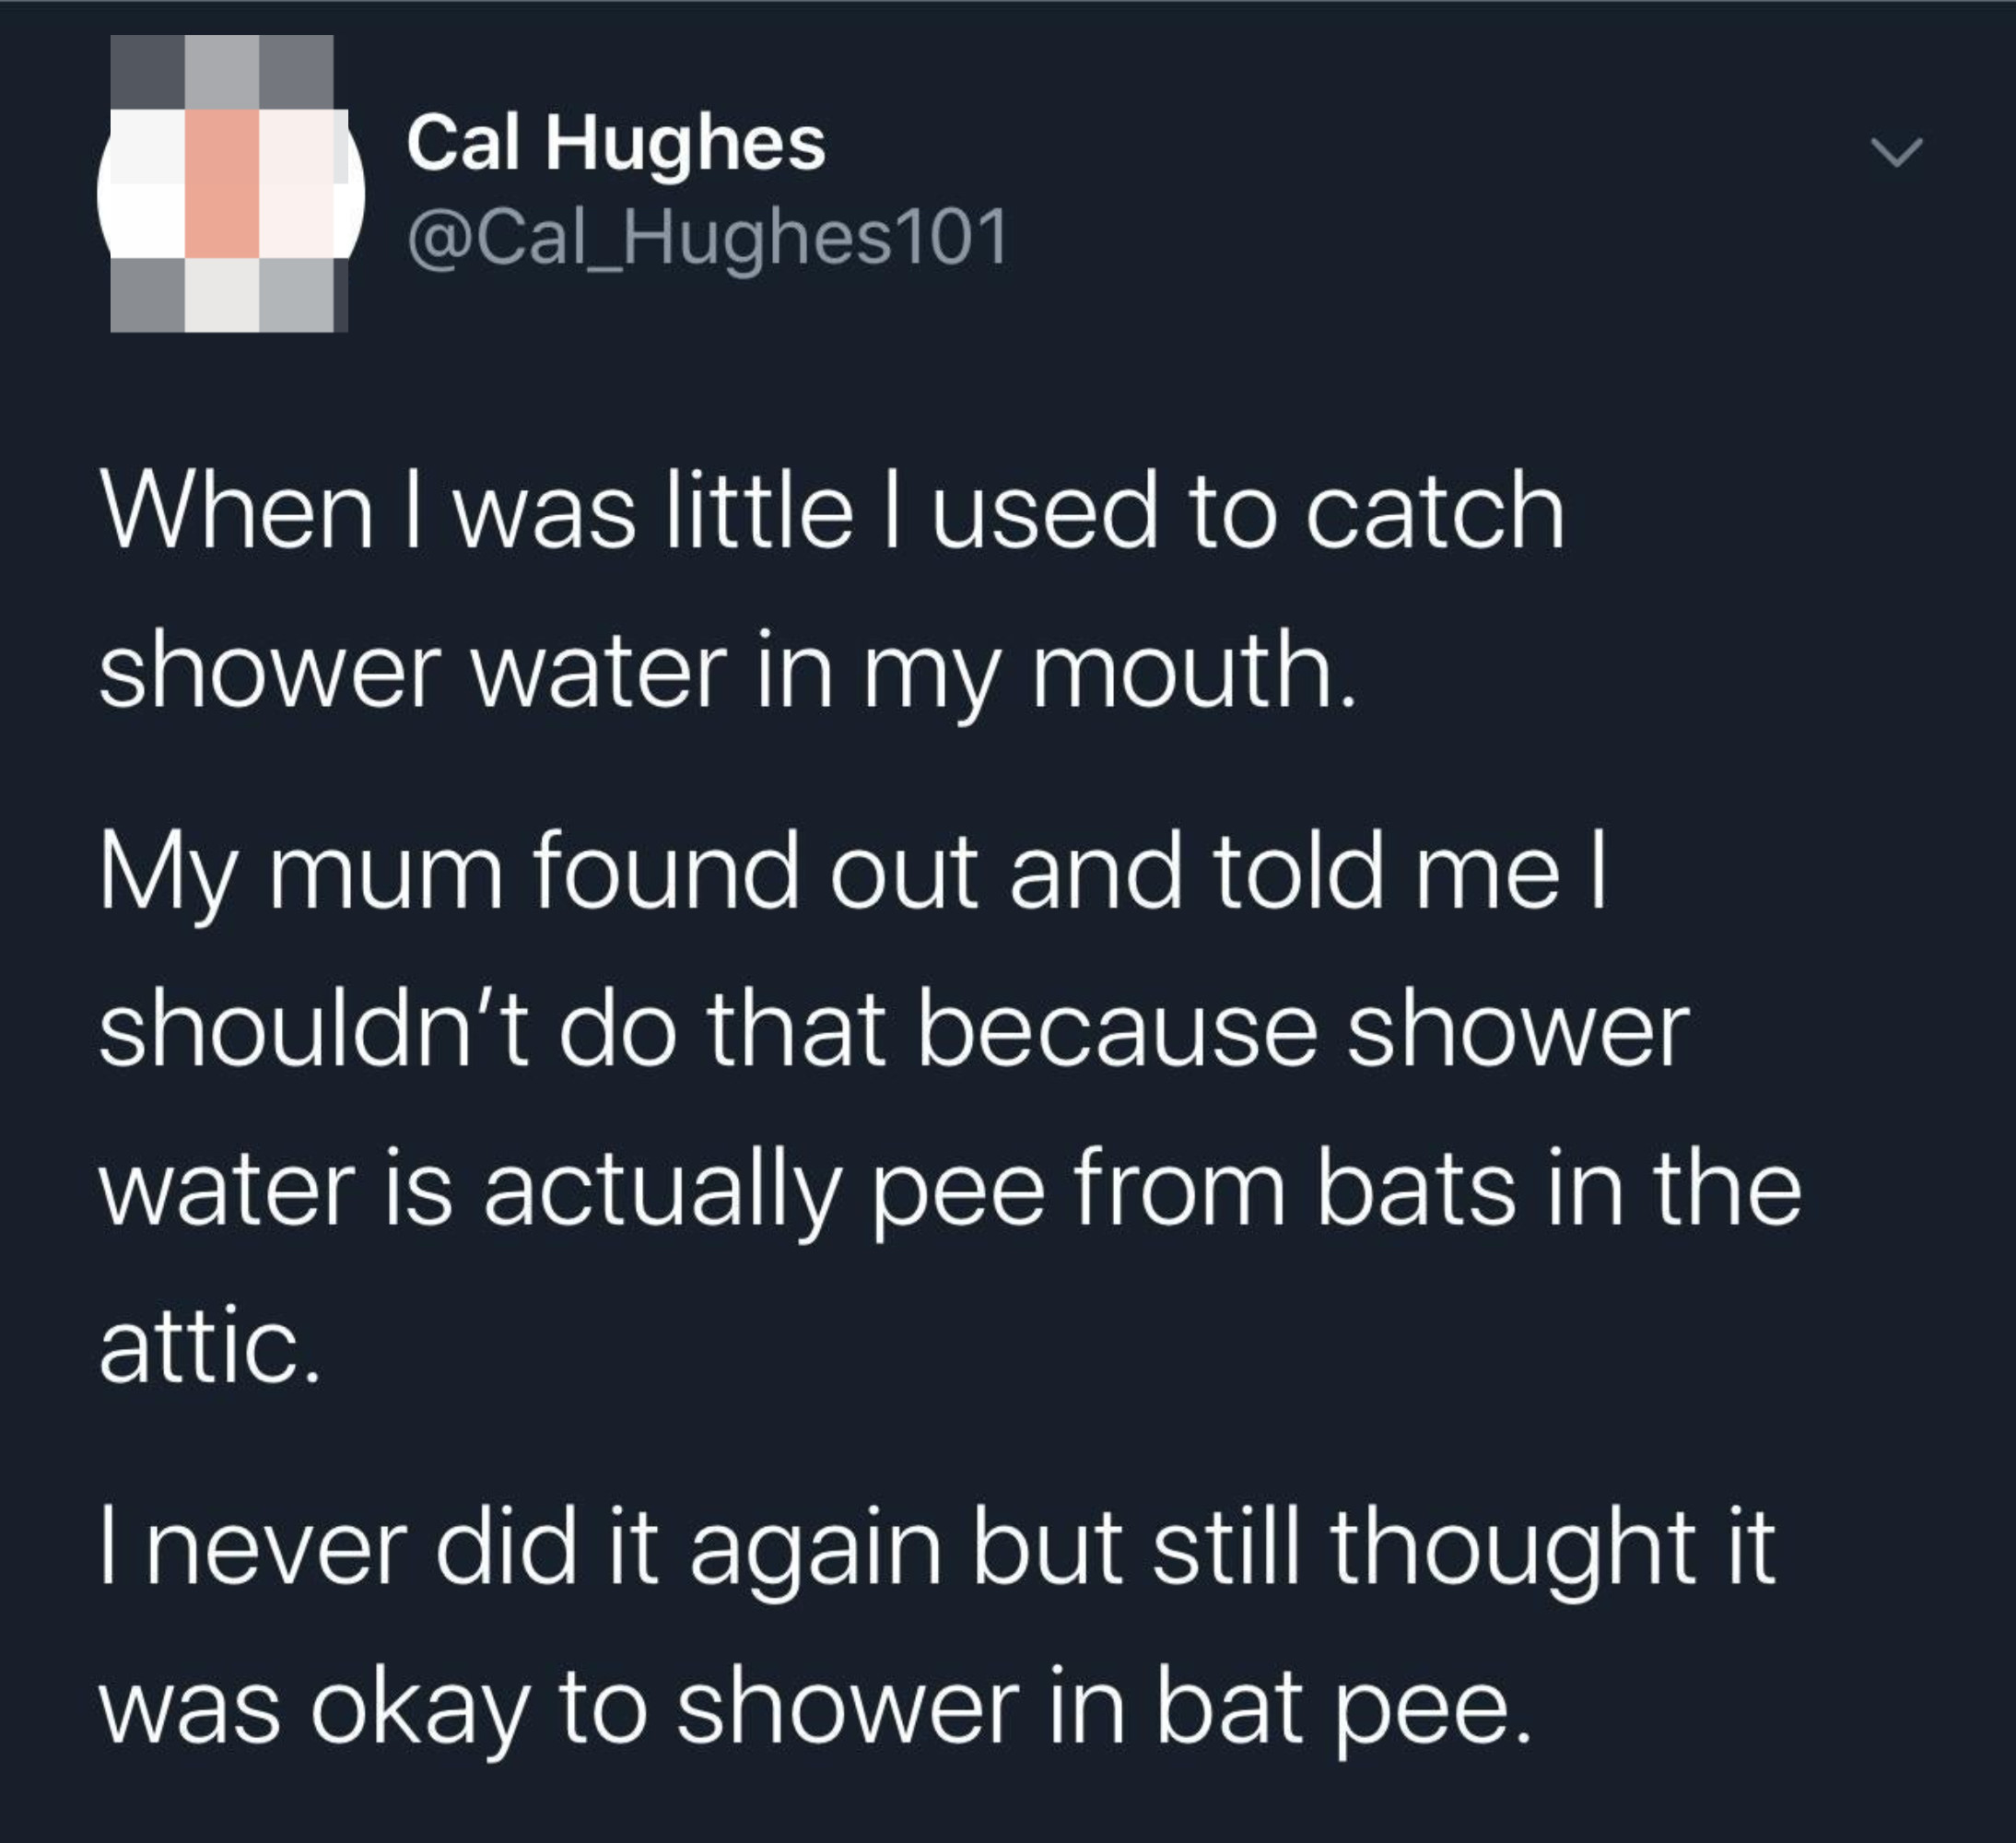 person who thinks that they are showering in bat pee